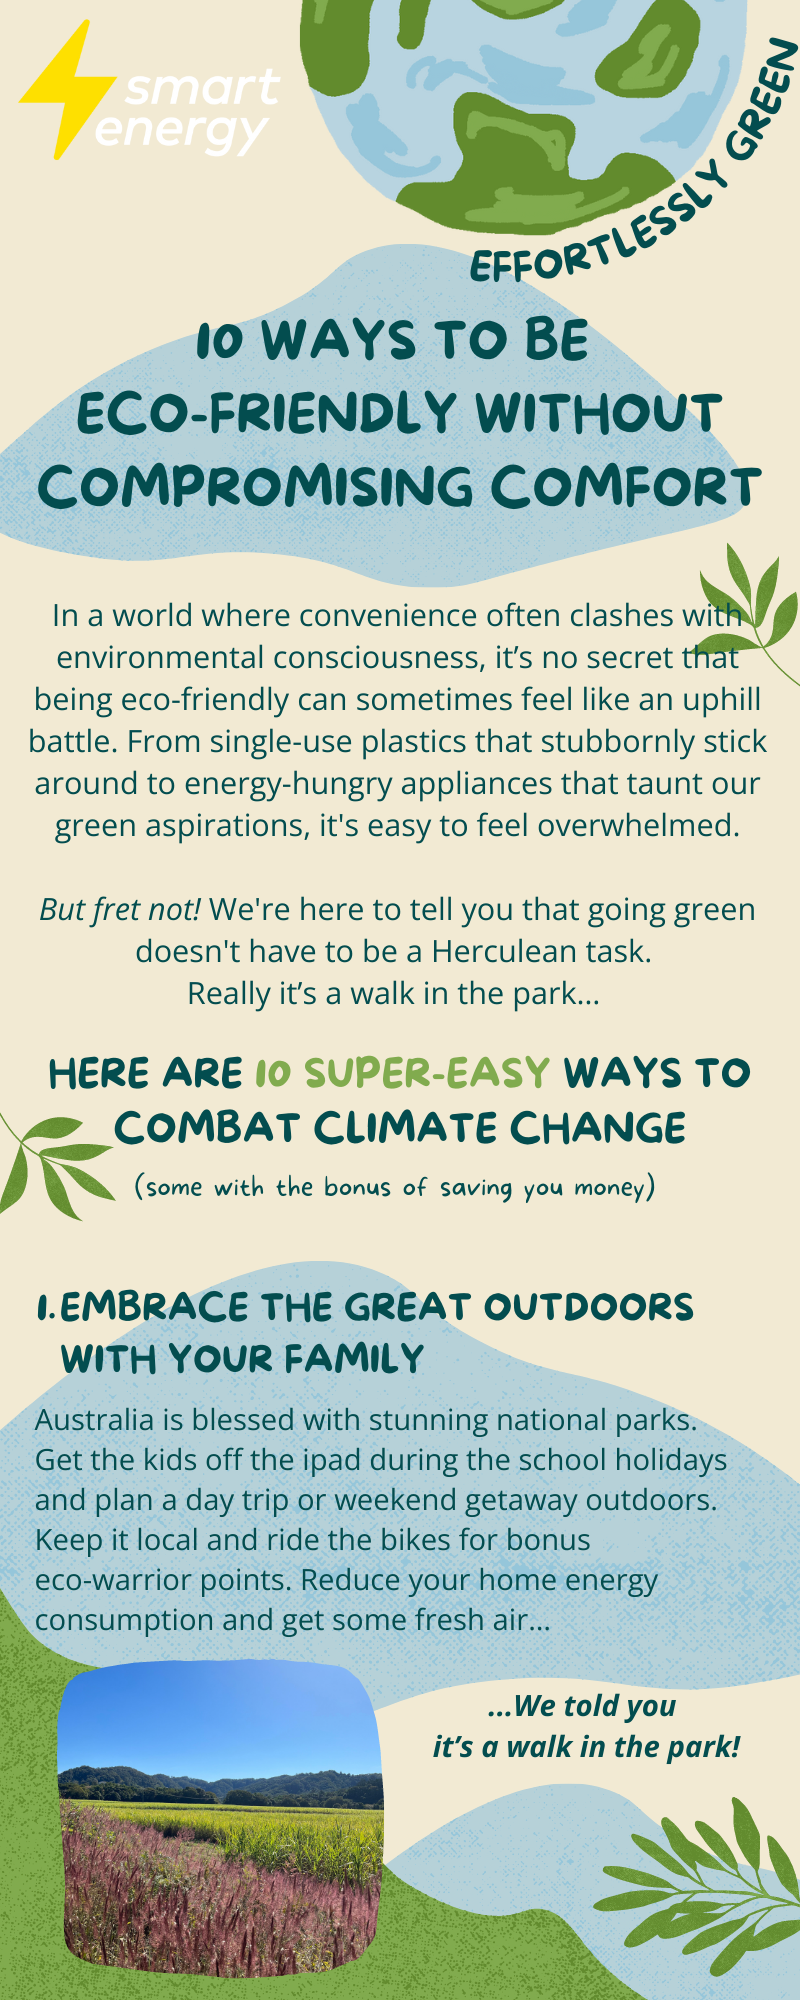 infographic with detailed tips to be eco-friendly without compromising everyday comfort